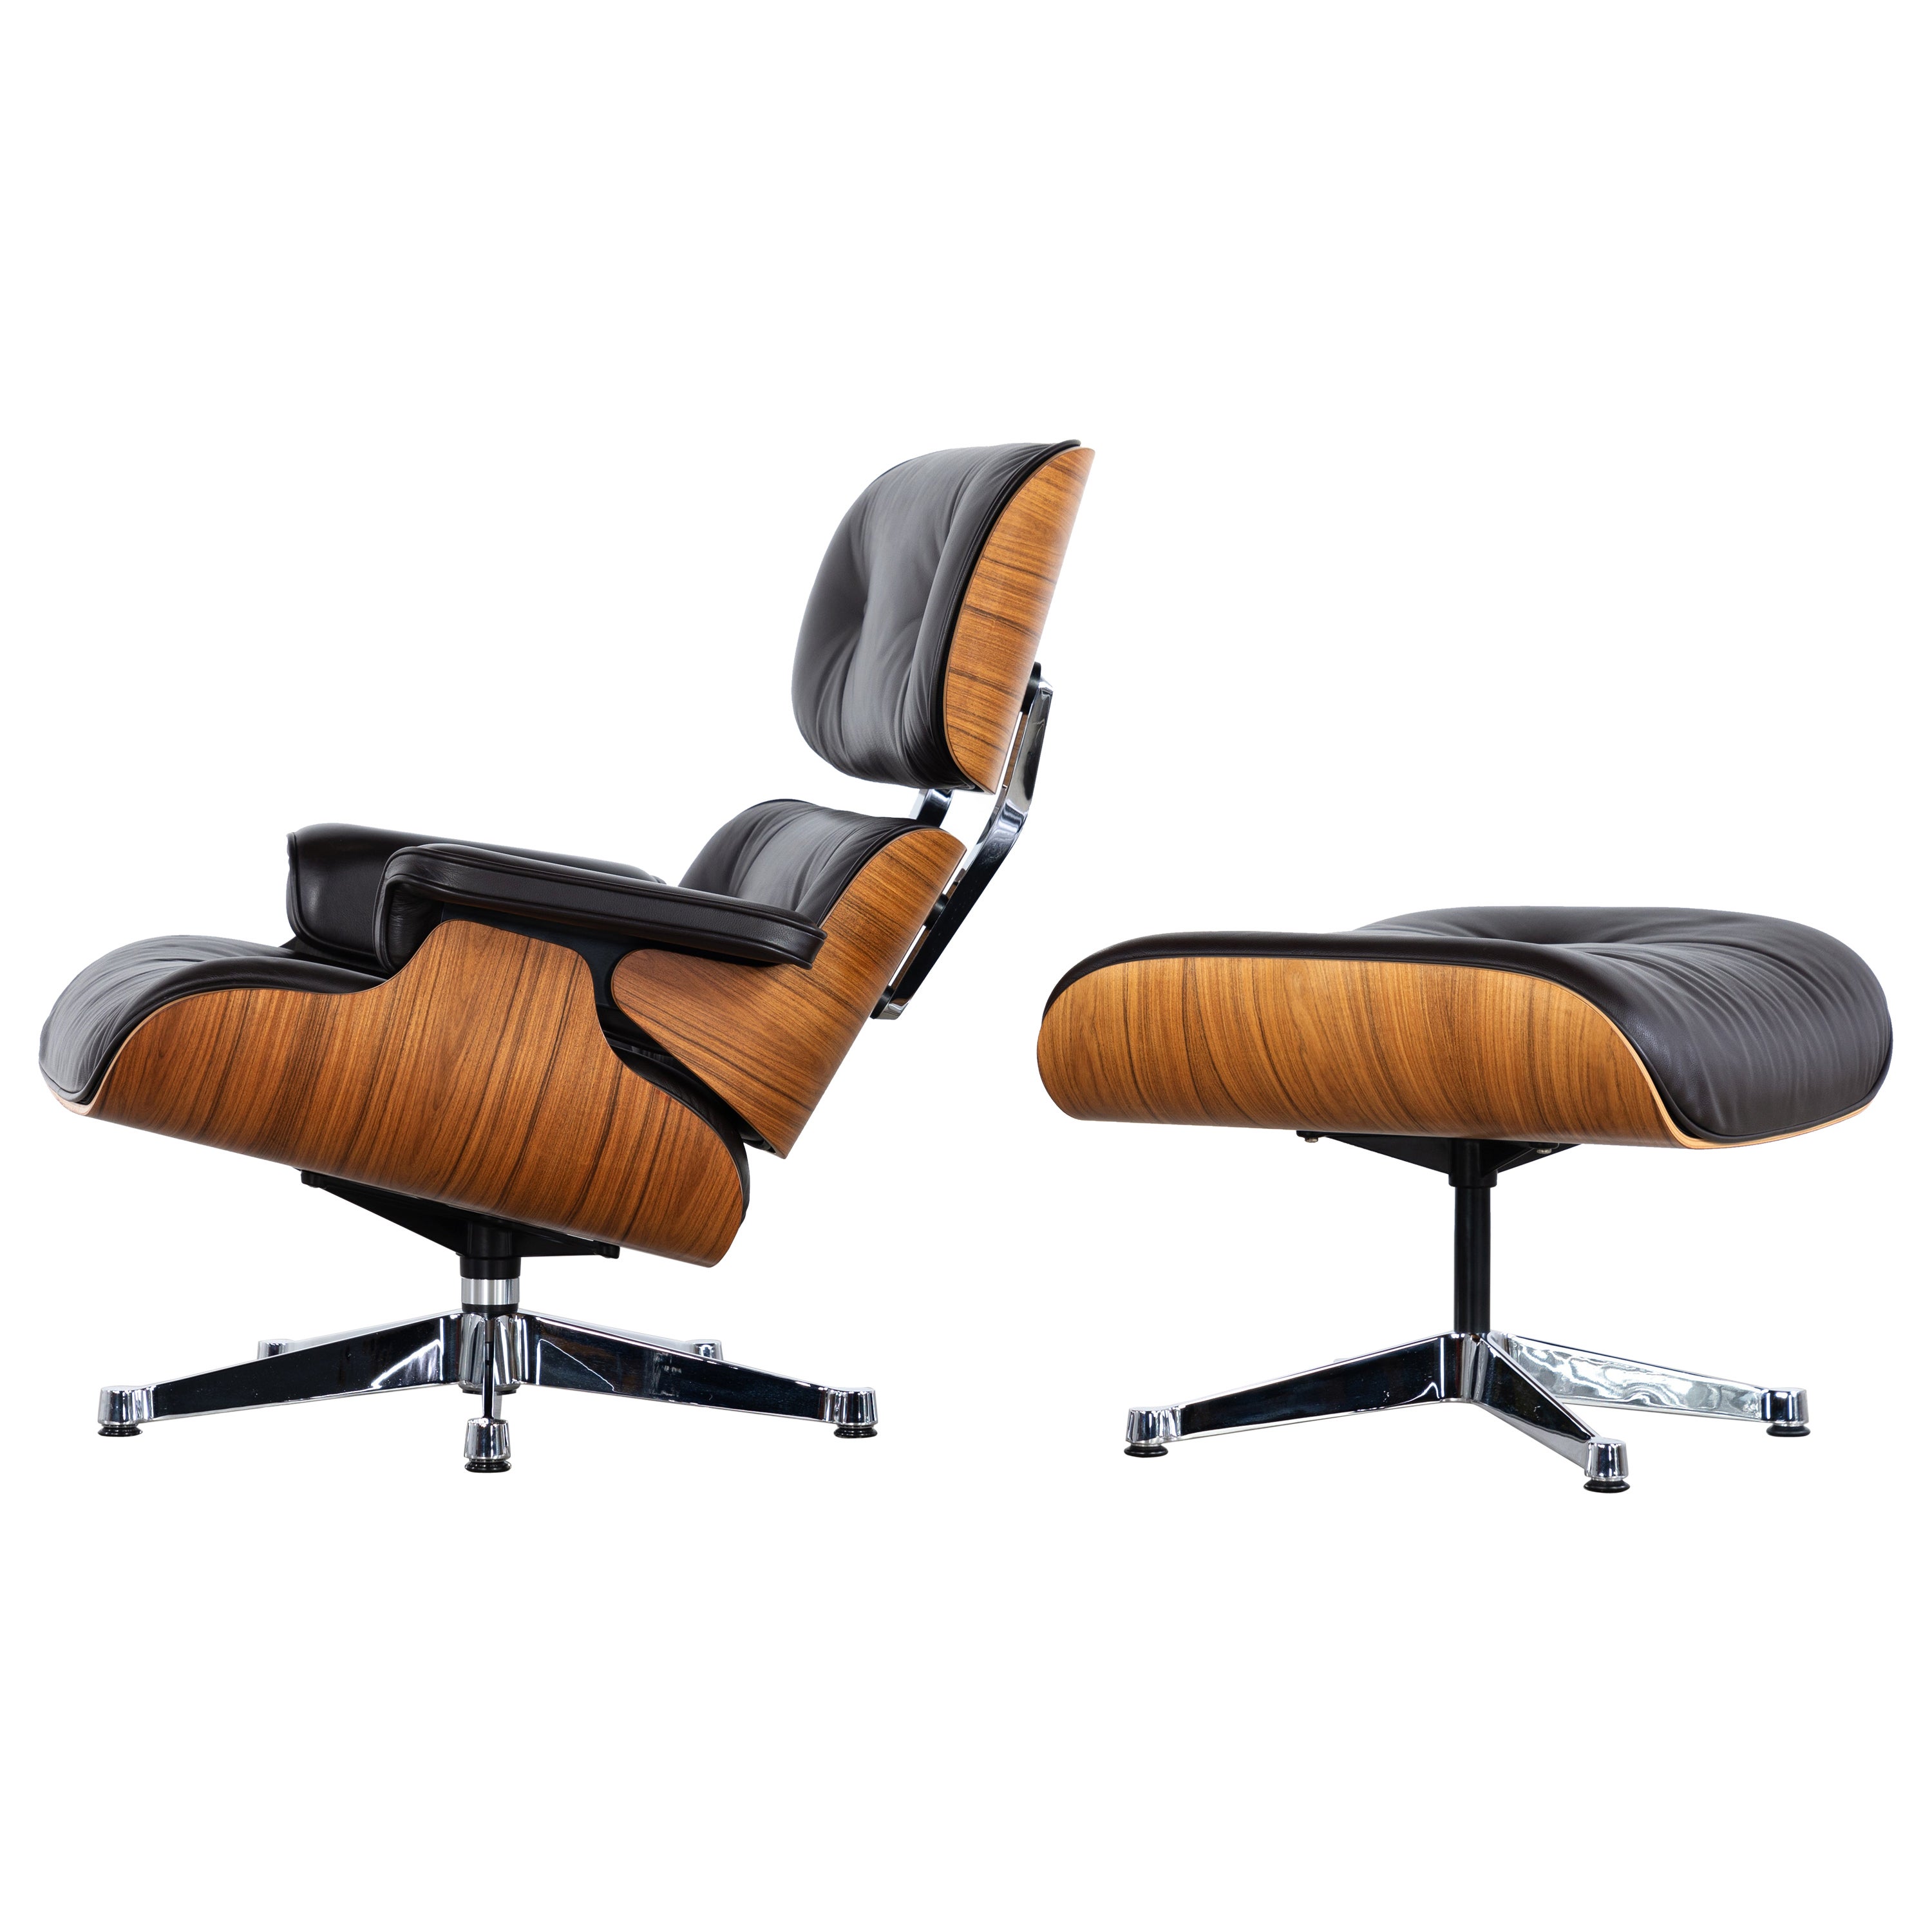 Charles Ray Eames Lounge Chair Ottoman Vitra certified Rosewood Chrome Leather For Sale